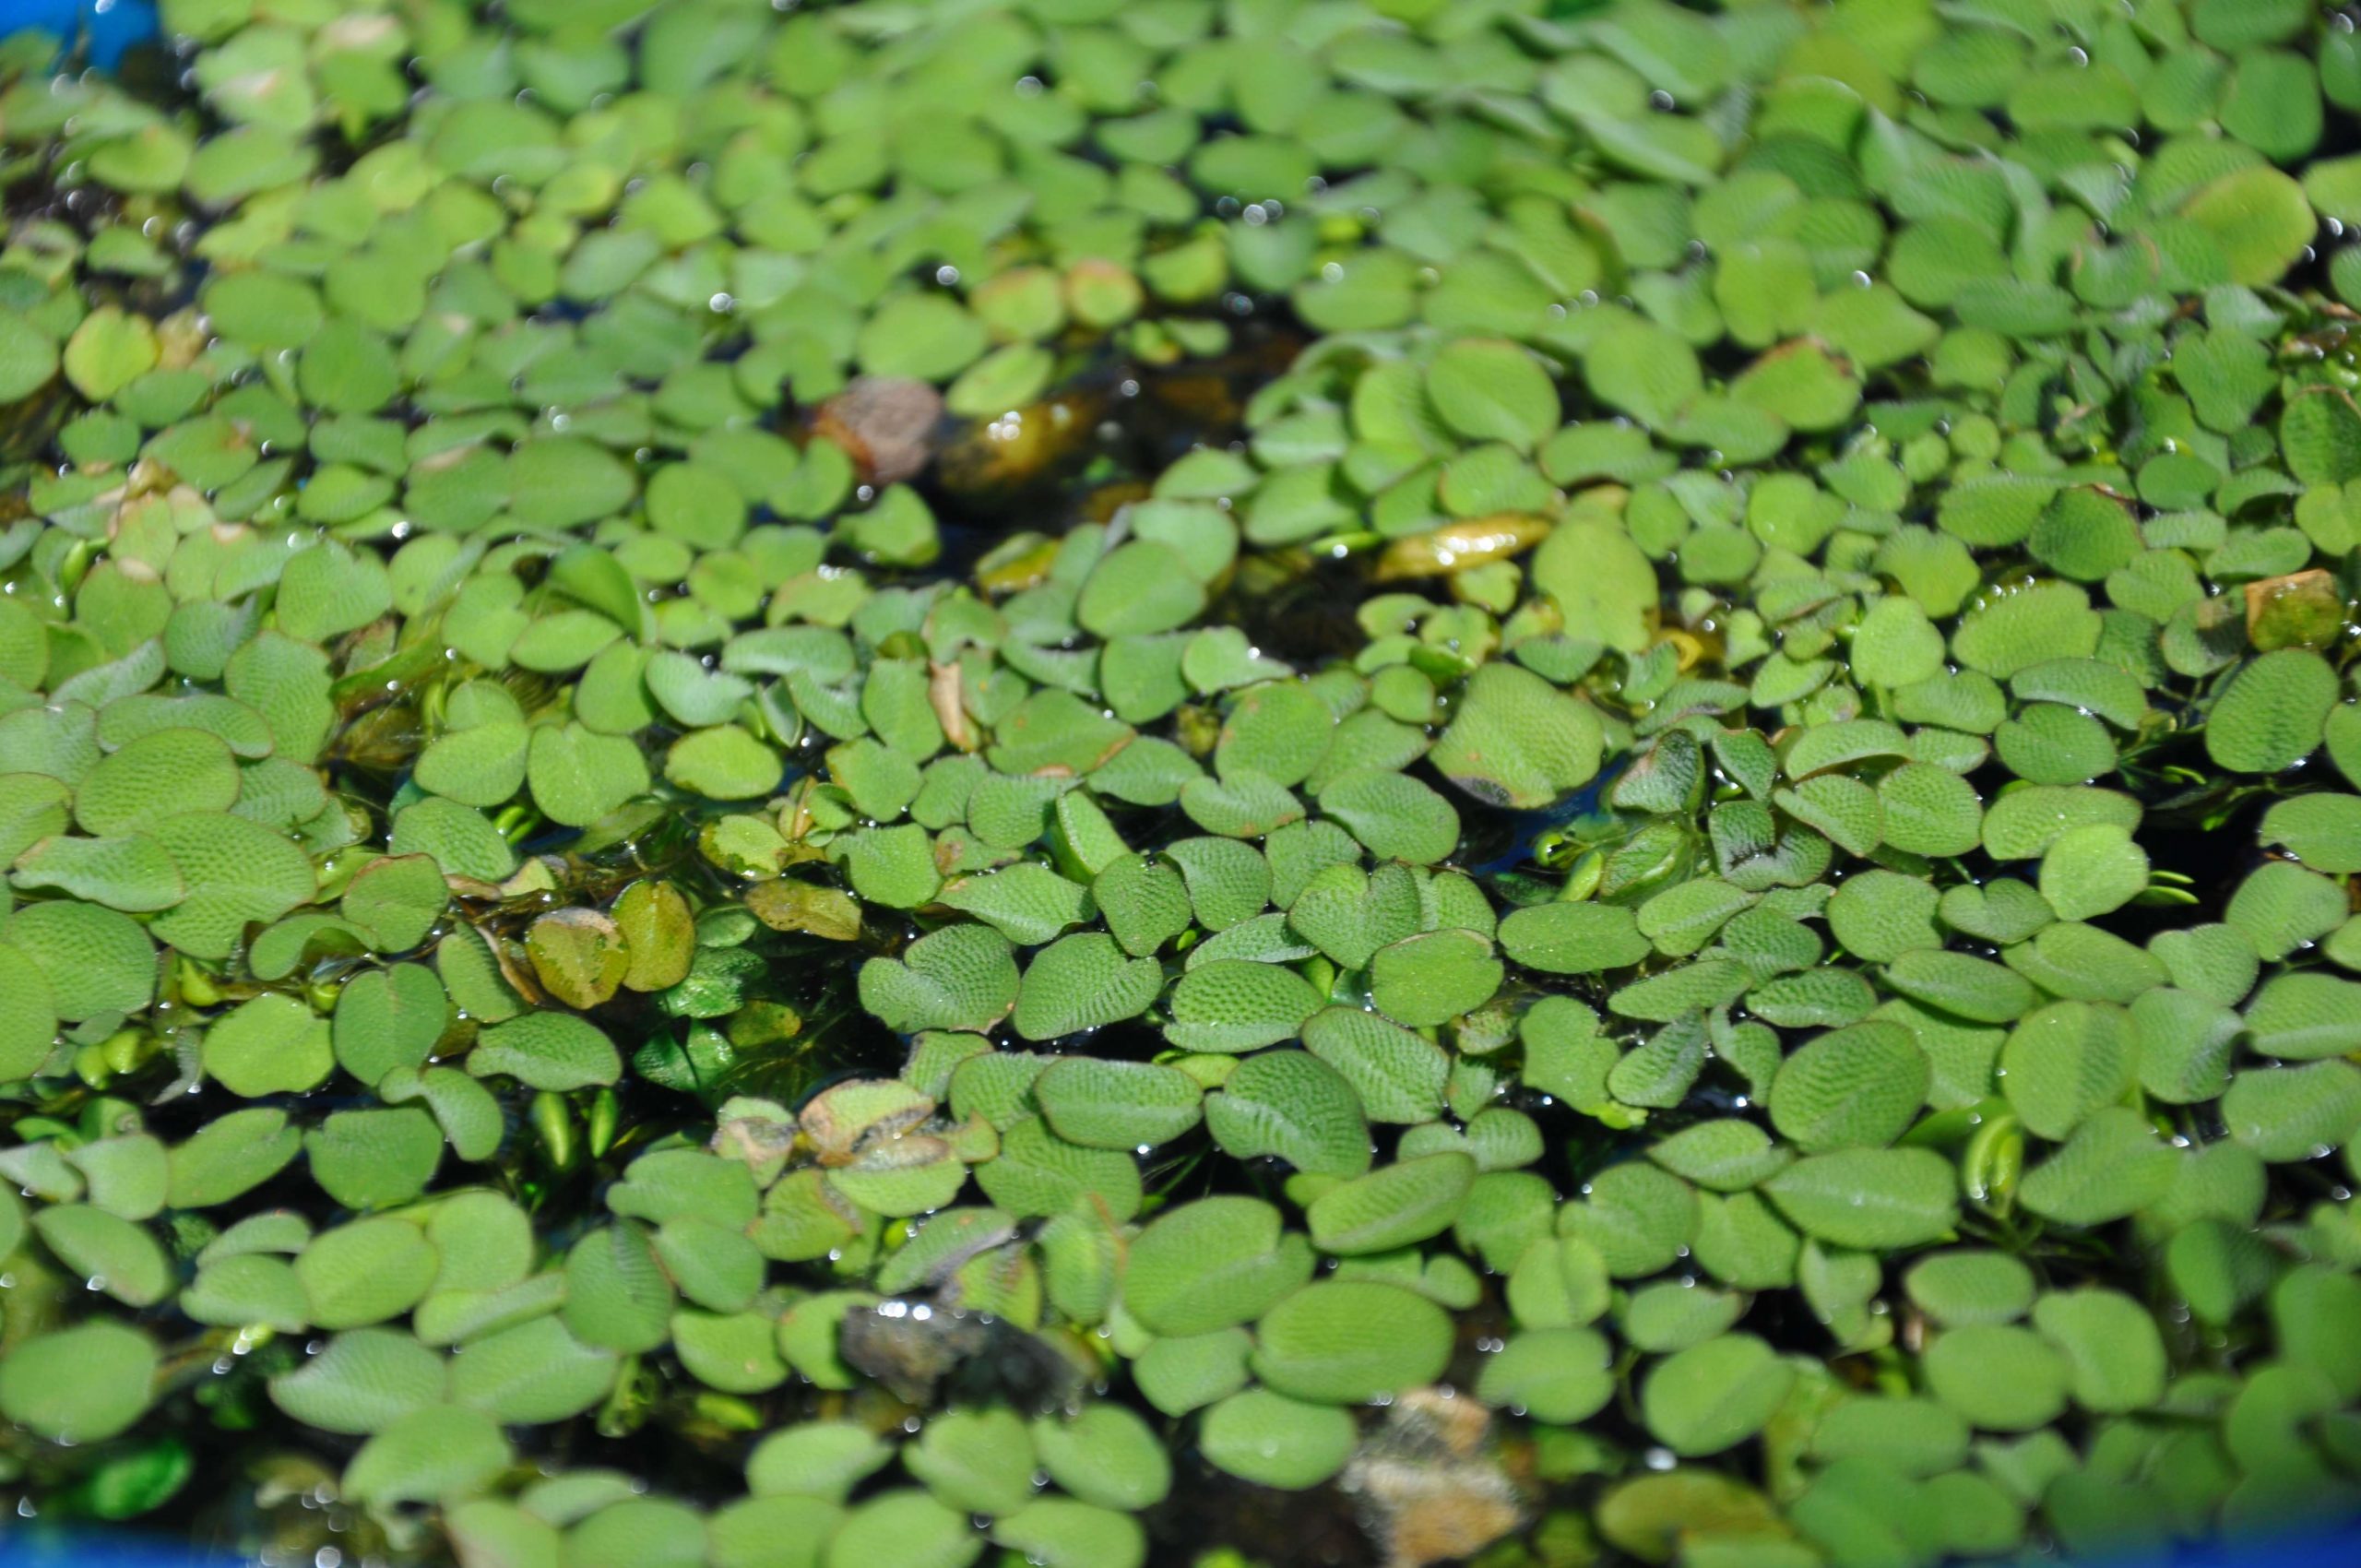 Giant salvinia (Salvinia molesta)
Contrary to its name, individual giant salvinia plants are rather small. However, floating colonies of this plant can completely block a waterway. This quickly reproducing plant is one of the worst to fish because holes in mats are very hard to come by and decaying mats can remove large amounts of oxygen from the water. There is no great way to fish giant salvinia.